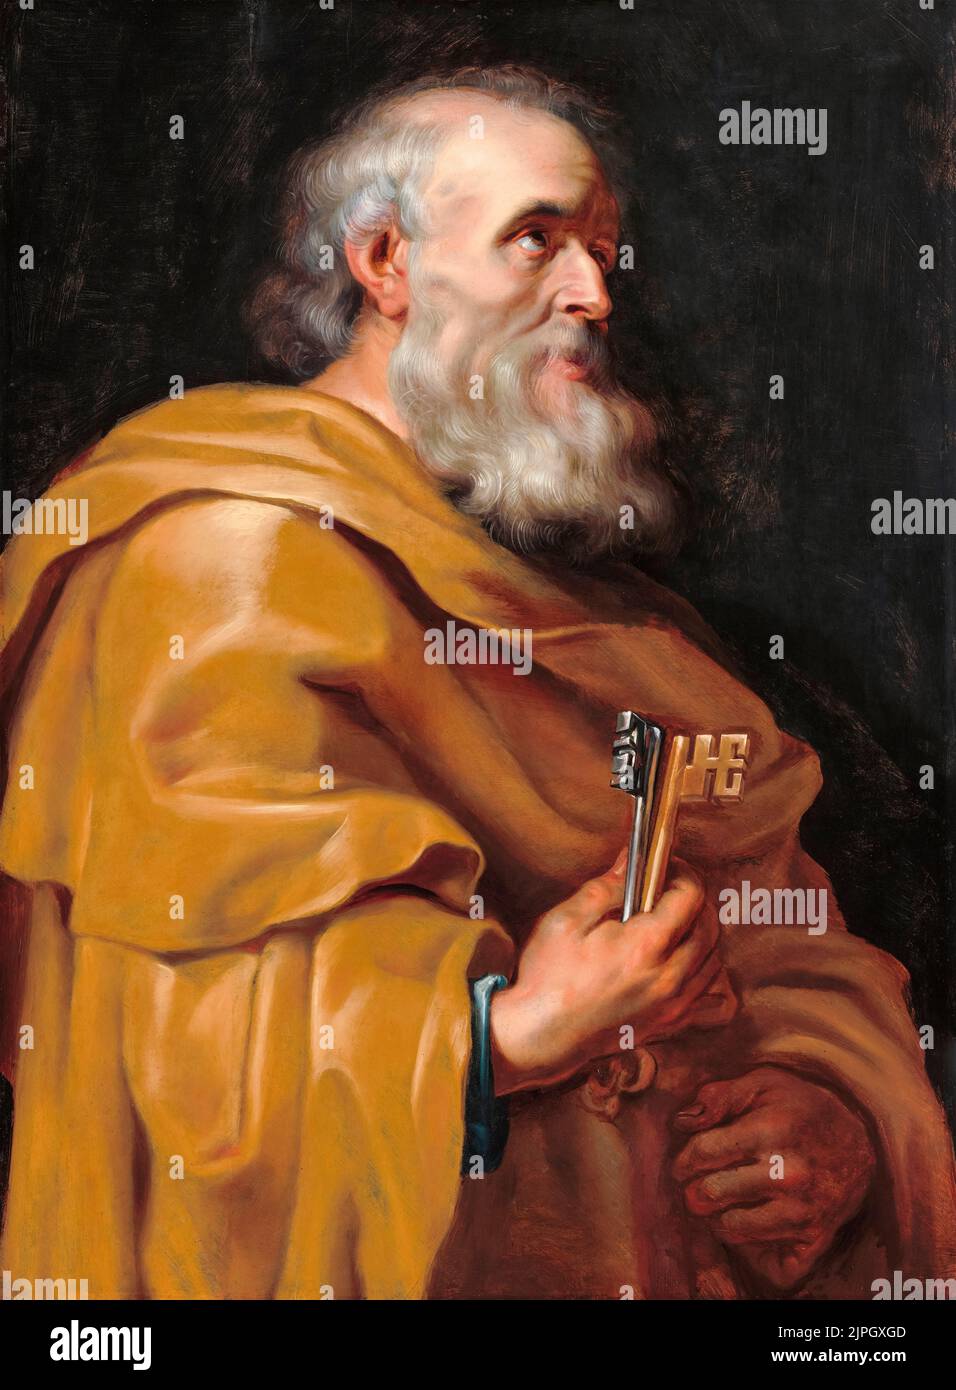 Saint Peter, portrait painting in oil on panel by Peter Paul Rubens, 1616-1618 Stock Photo